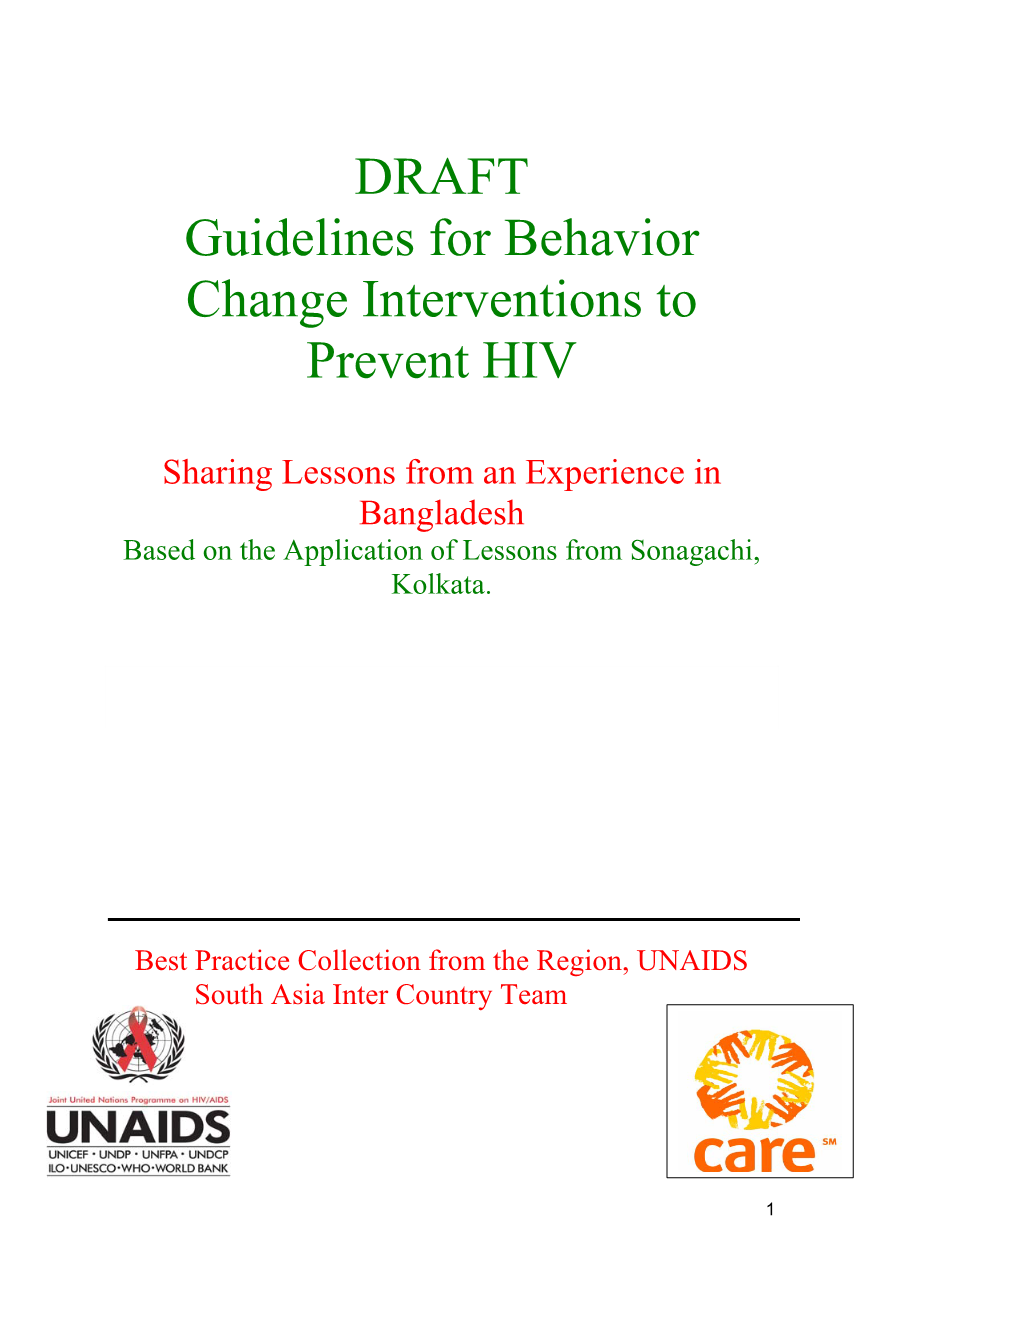 DRAFT Guidelines for Behavior Change Interventions to Prevent HIV